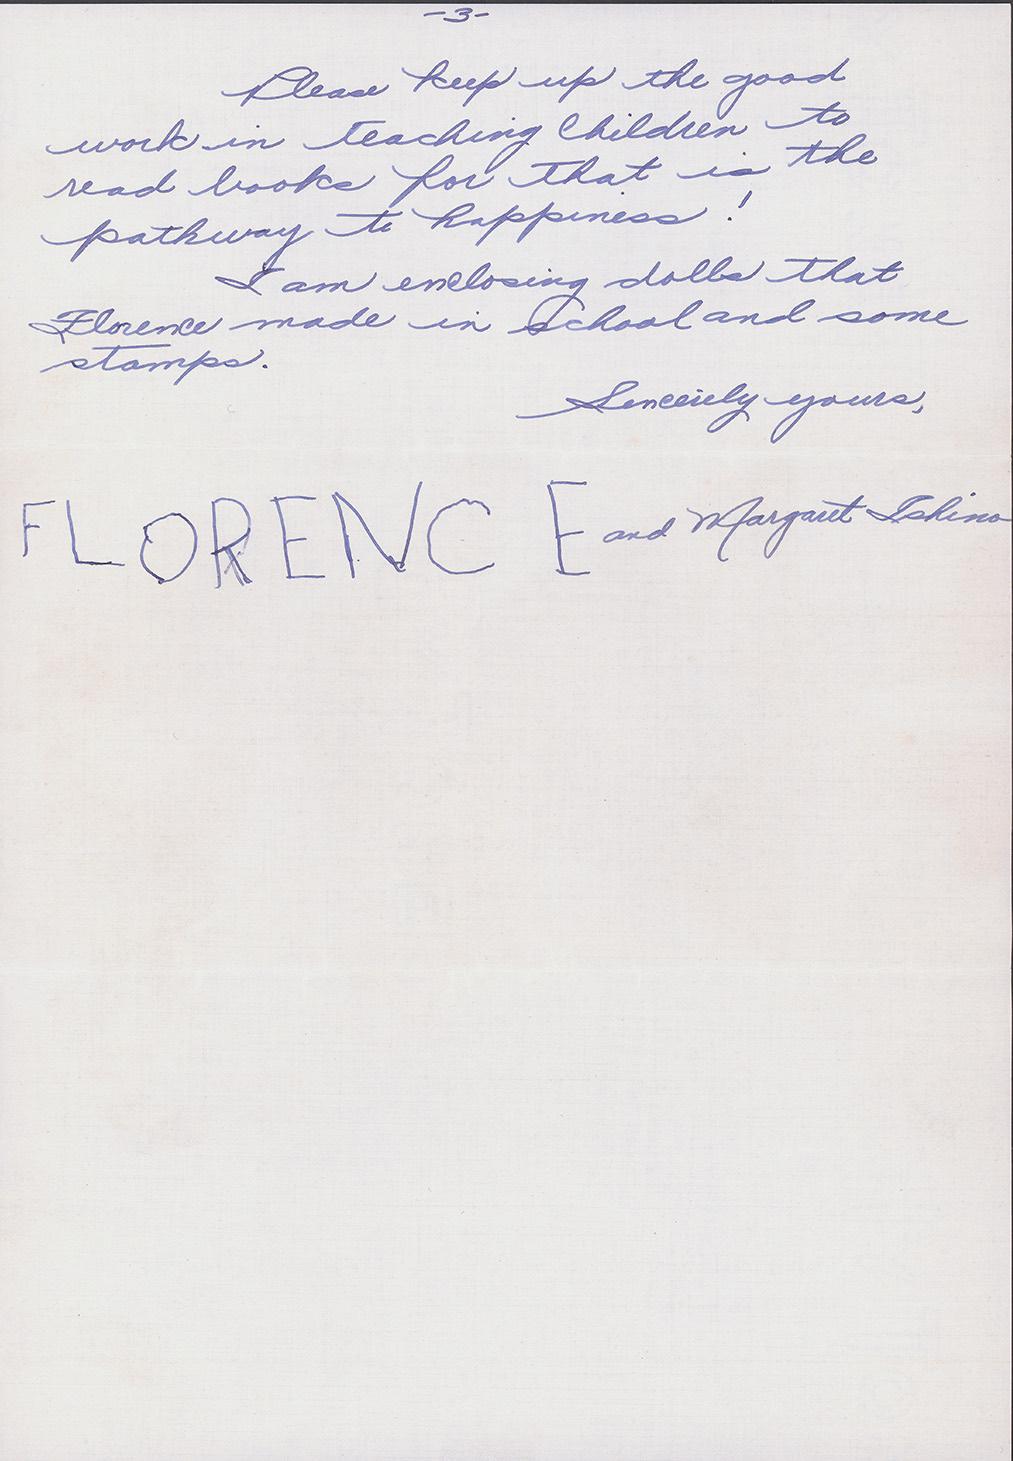 If you happen to have any discarded books, Florence and I would certainly appreciate them.